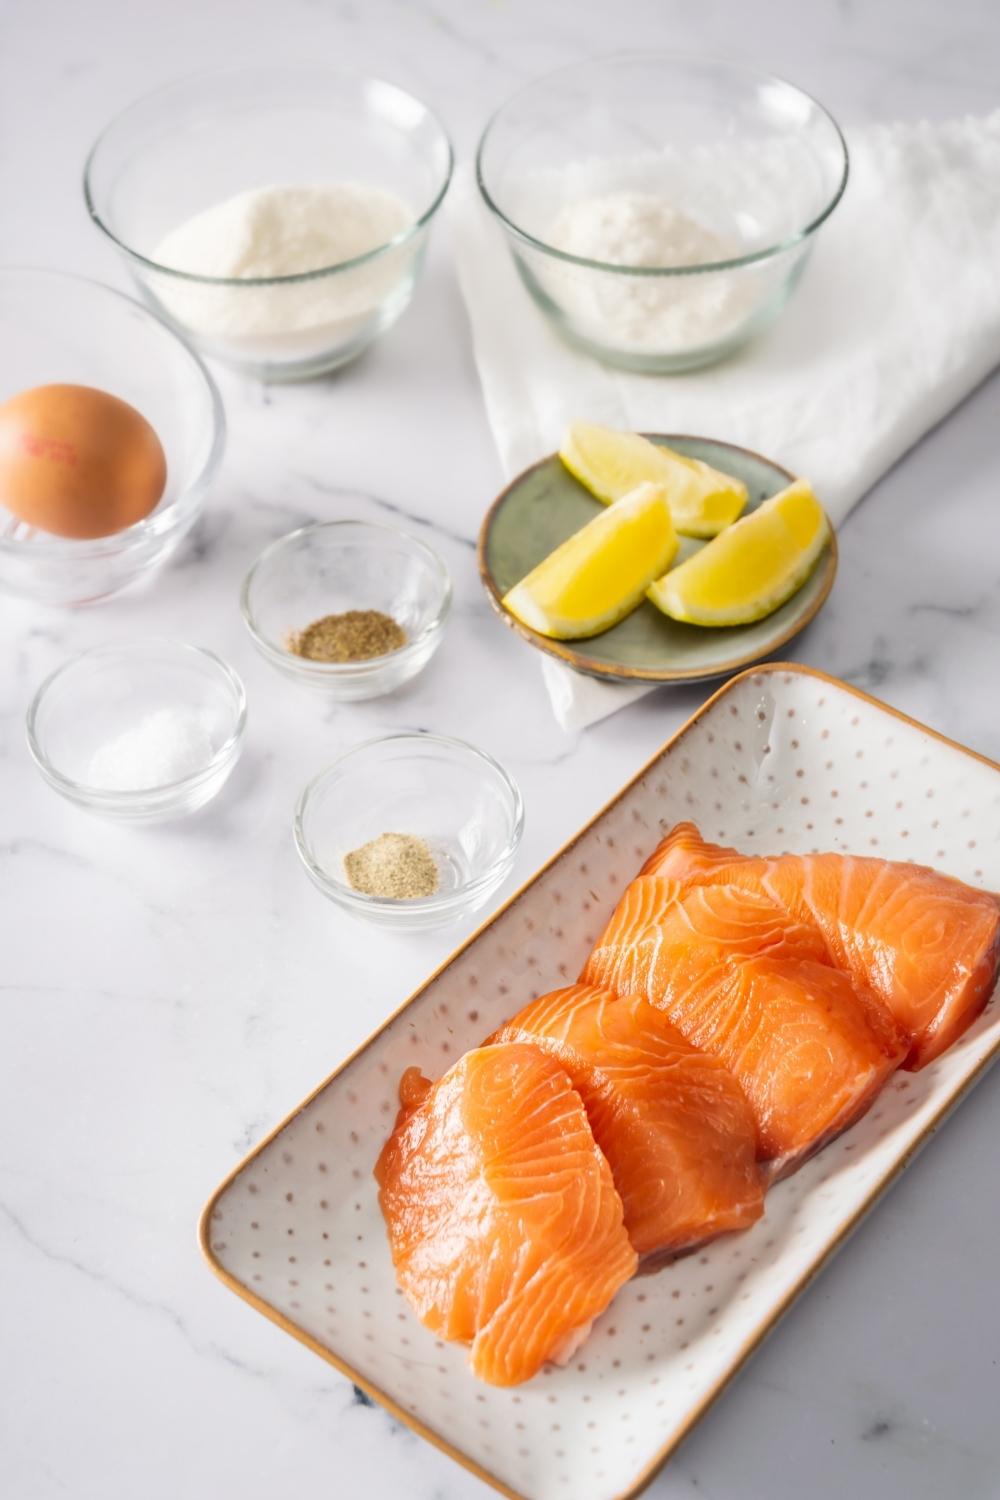 Four salmon fillets on a rectangular plate, a bowl of salt, a bowl of pepper, and a bowl of seasoning are behind it.